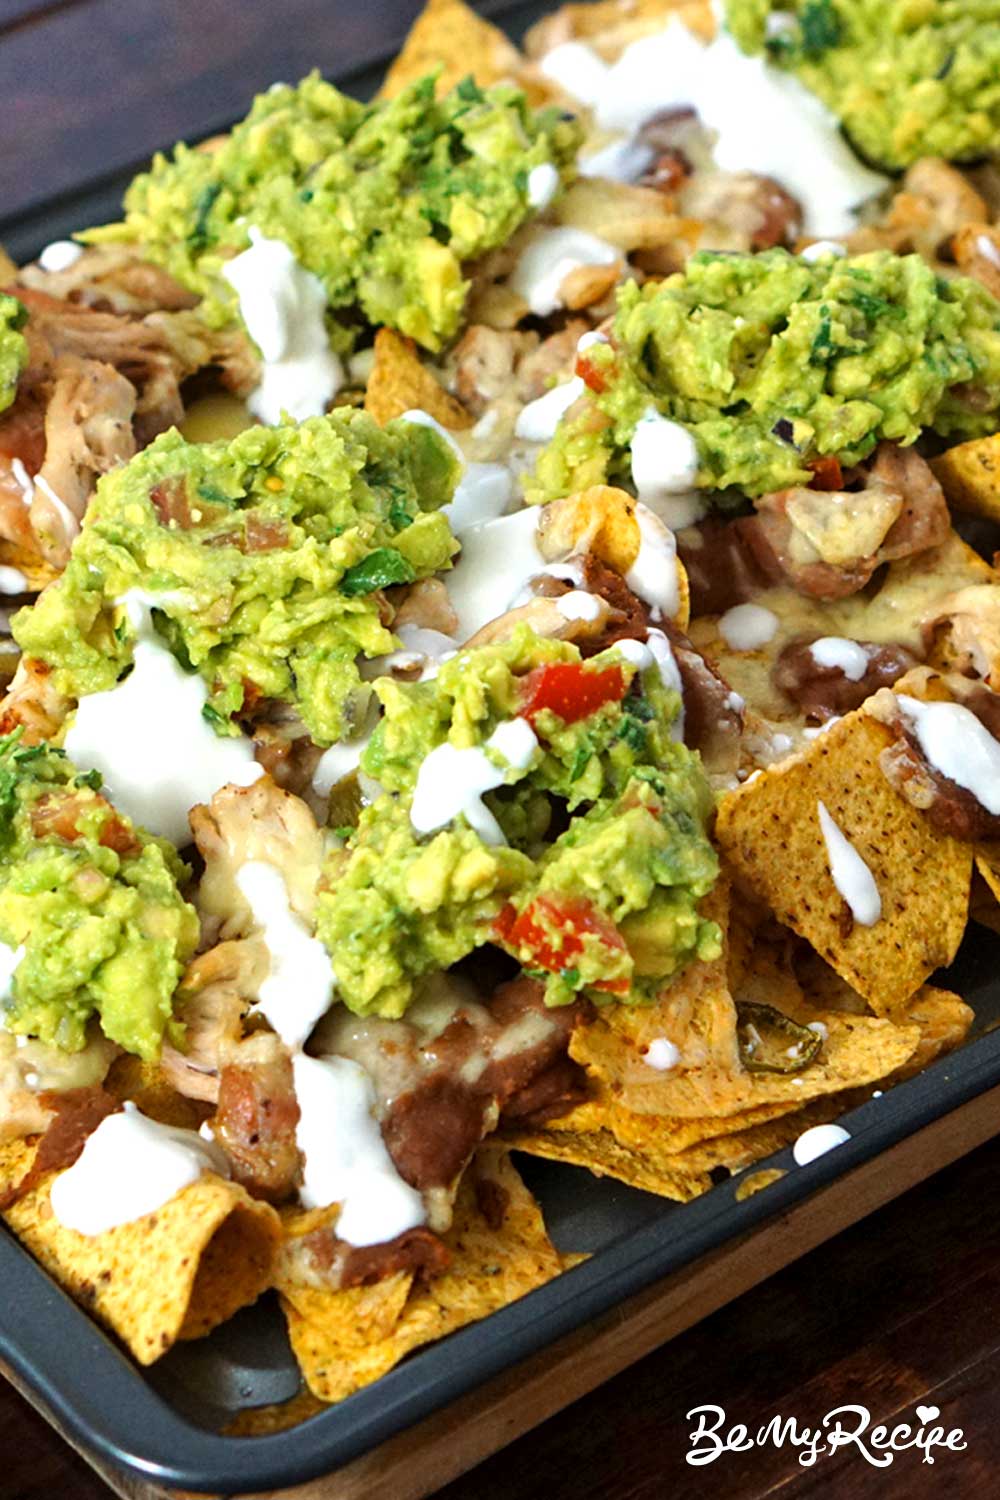 Indulgent Loaded Nachos with Chicken, Refried Beans, and Guacamole